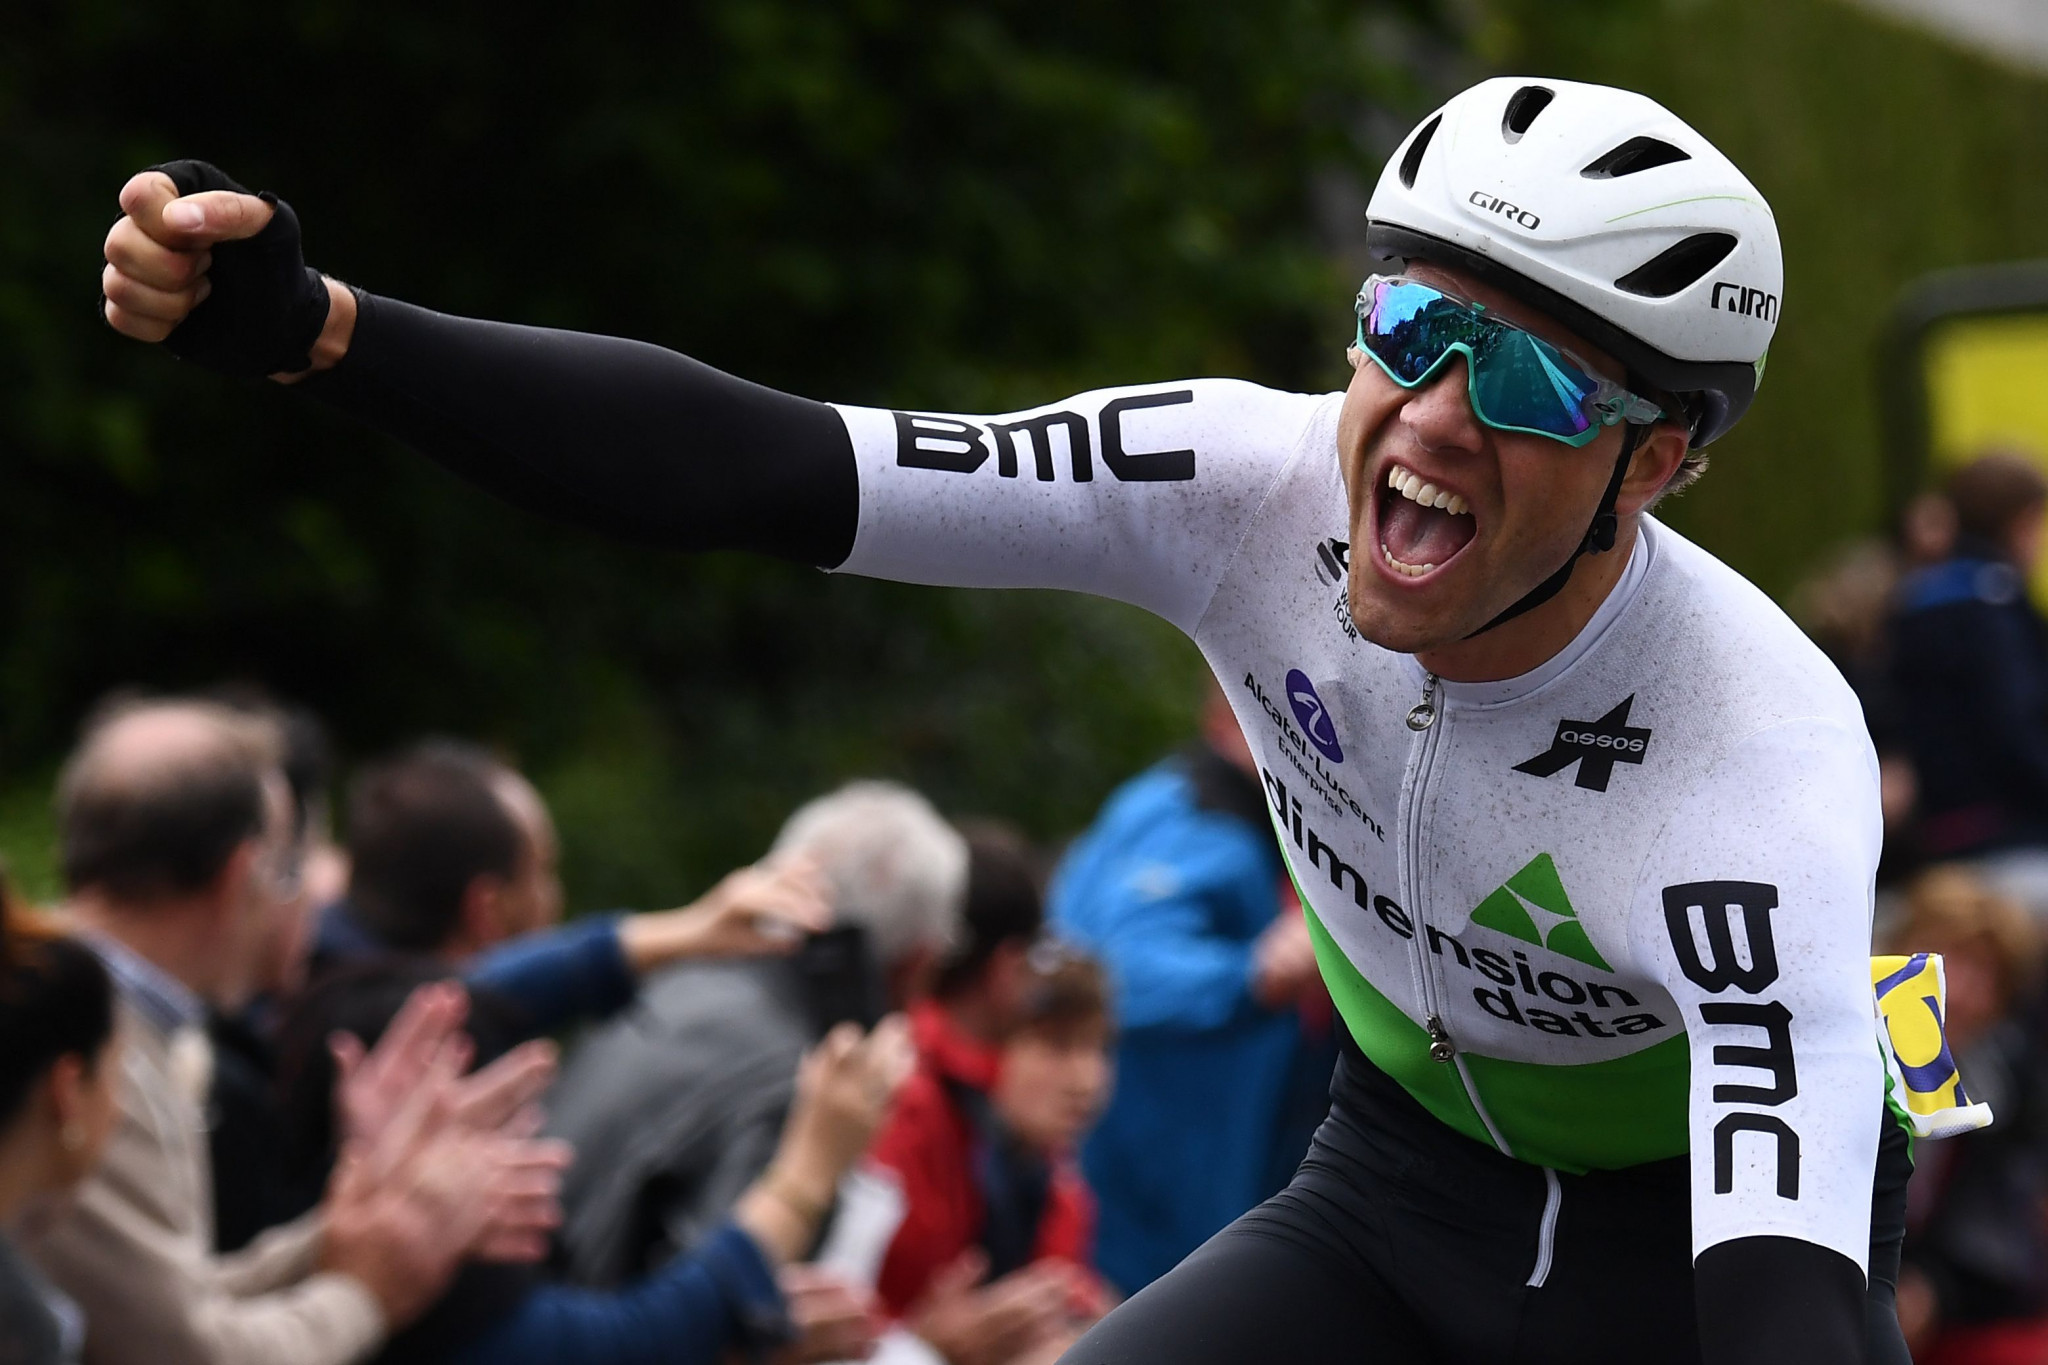 Norway's Edvald Boassan Hagen won the opening stage of the Critérium du Dauphiné ©Getty Images